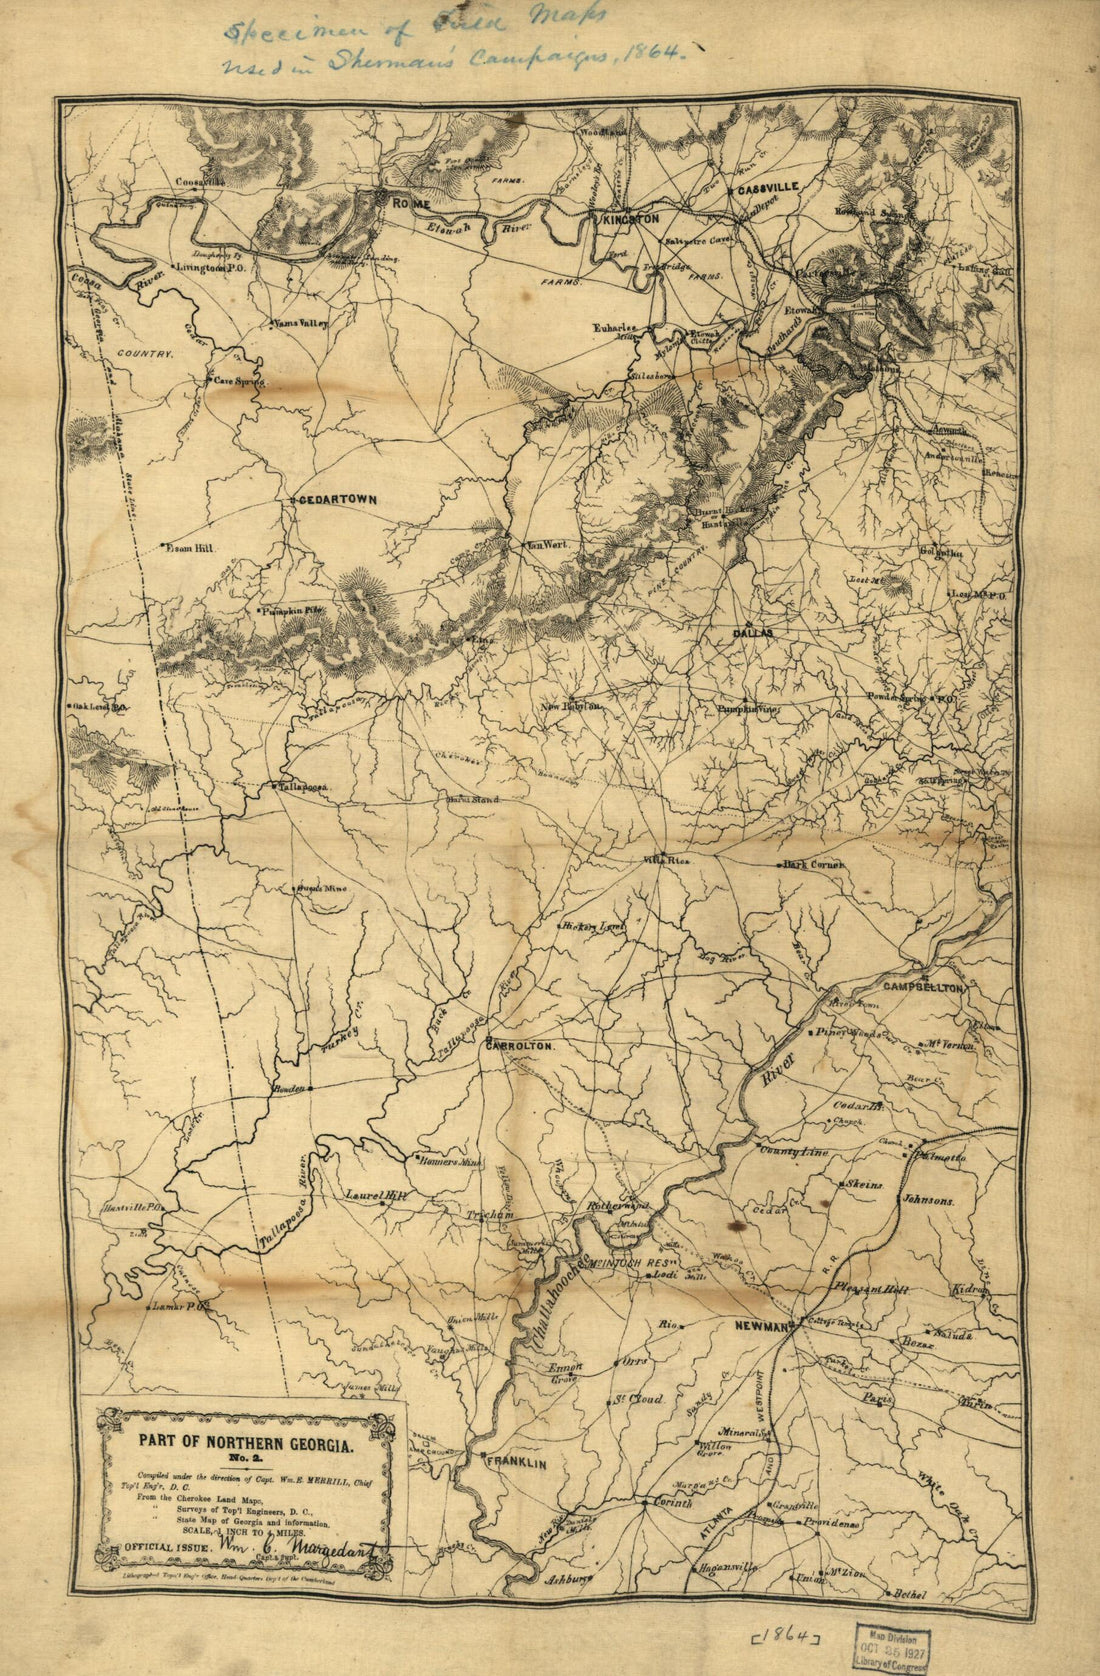 This old map of Part of Northern Georgia : No. 2 from 1864 was created by Wm. C. (William C.) Margedant, W. E. (William Emery) Merrill,  United States. Army. Corps of Topographical Engineers in 1864